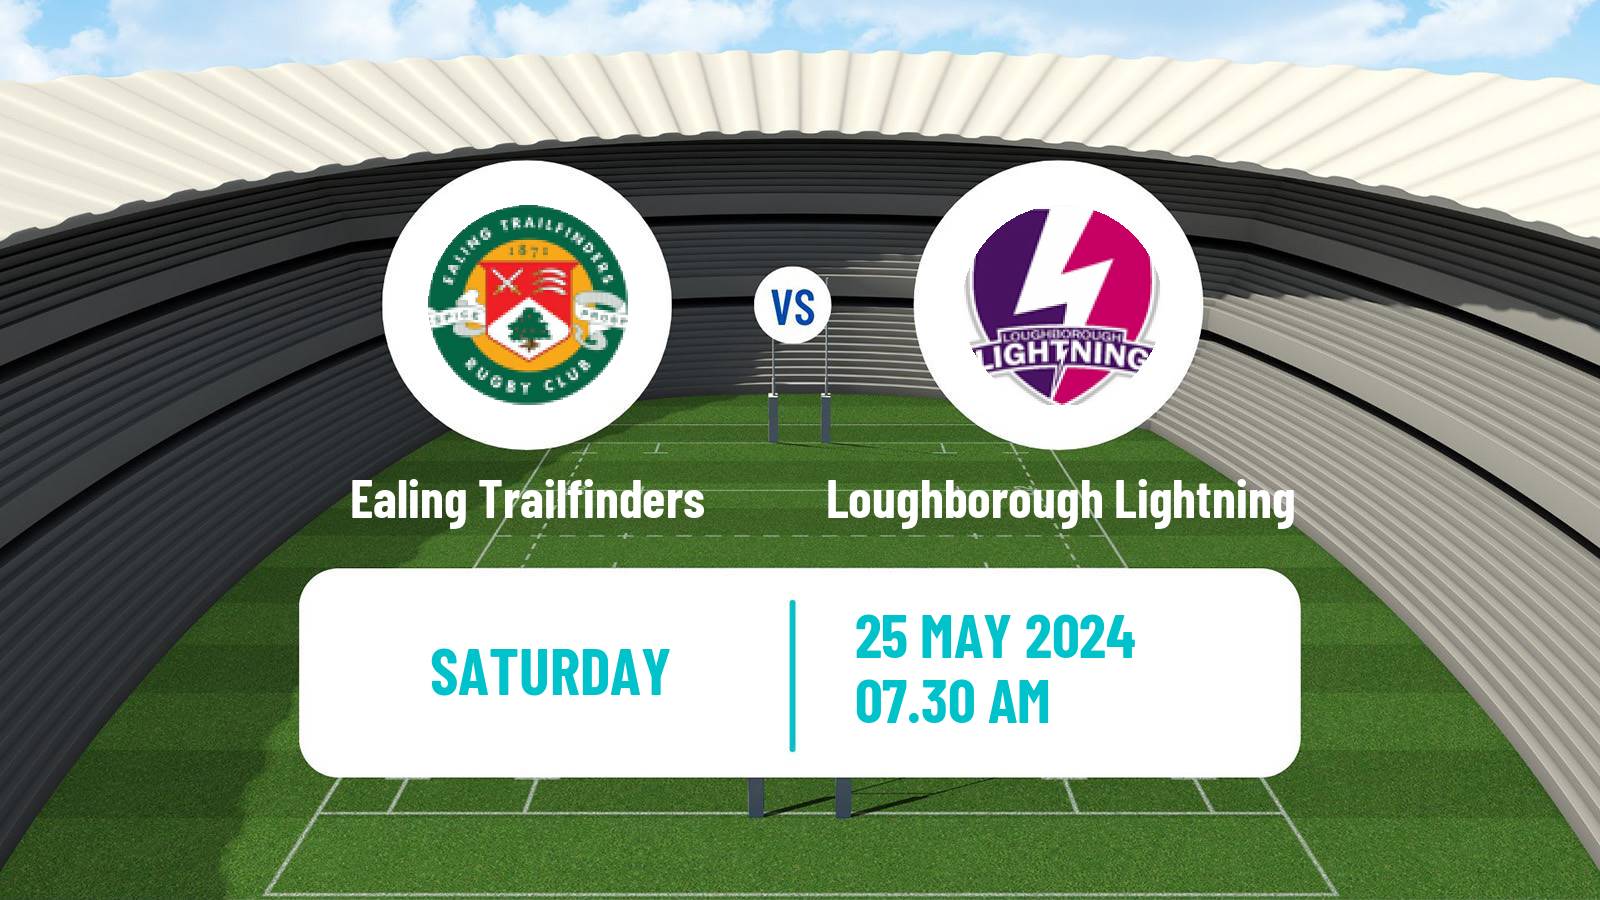 Rugby union English Premier 15s Rugby Women Ealing Trailfinders - Loughborough Lightning